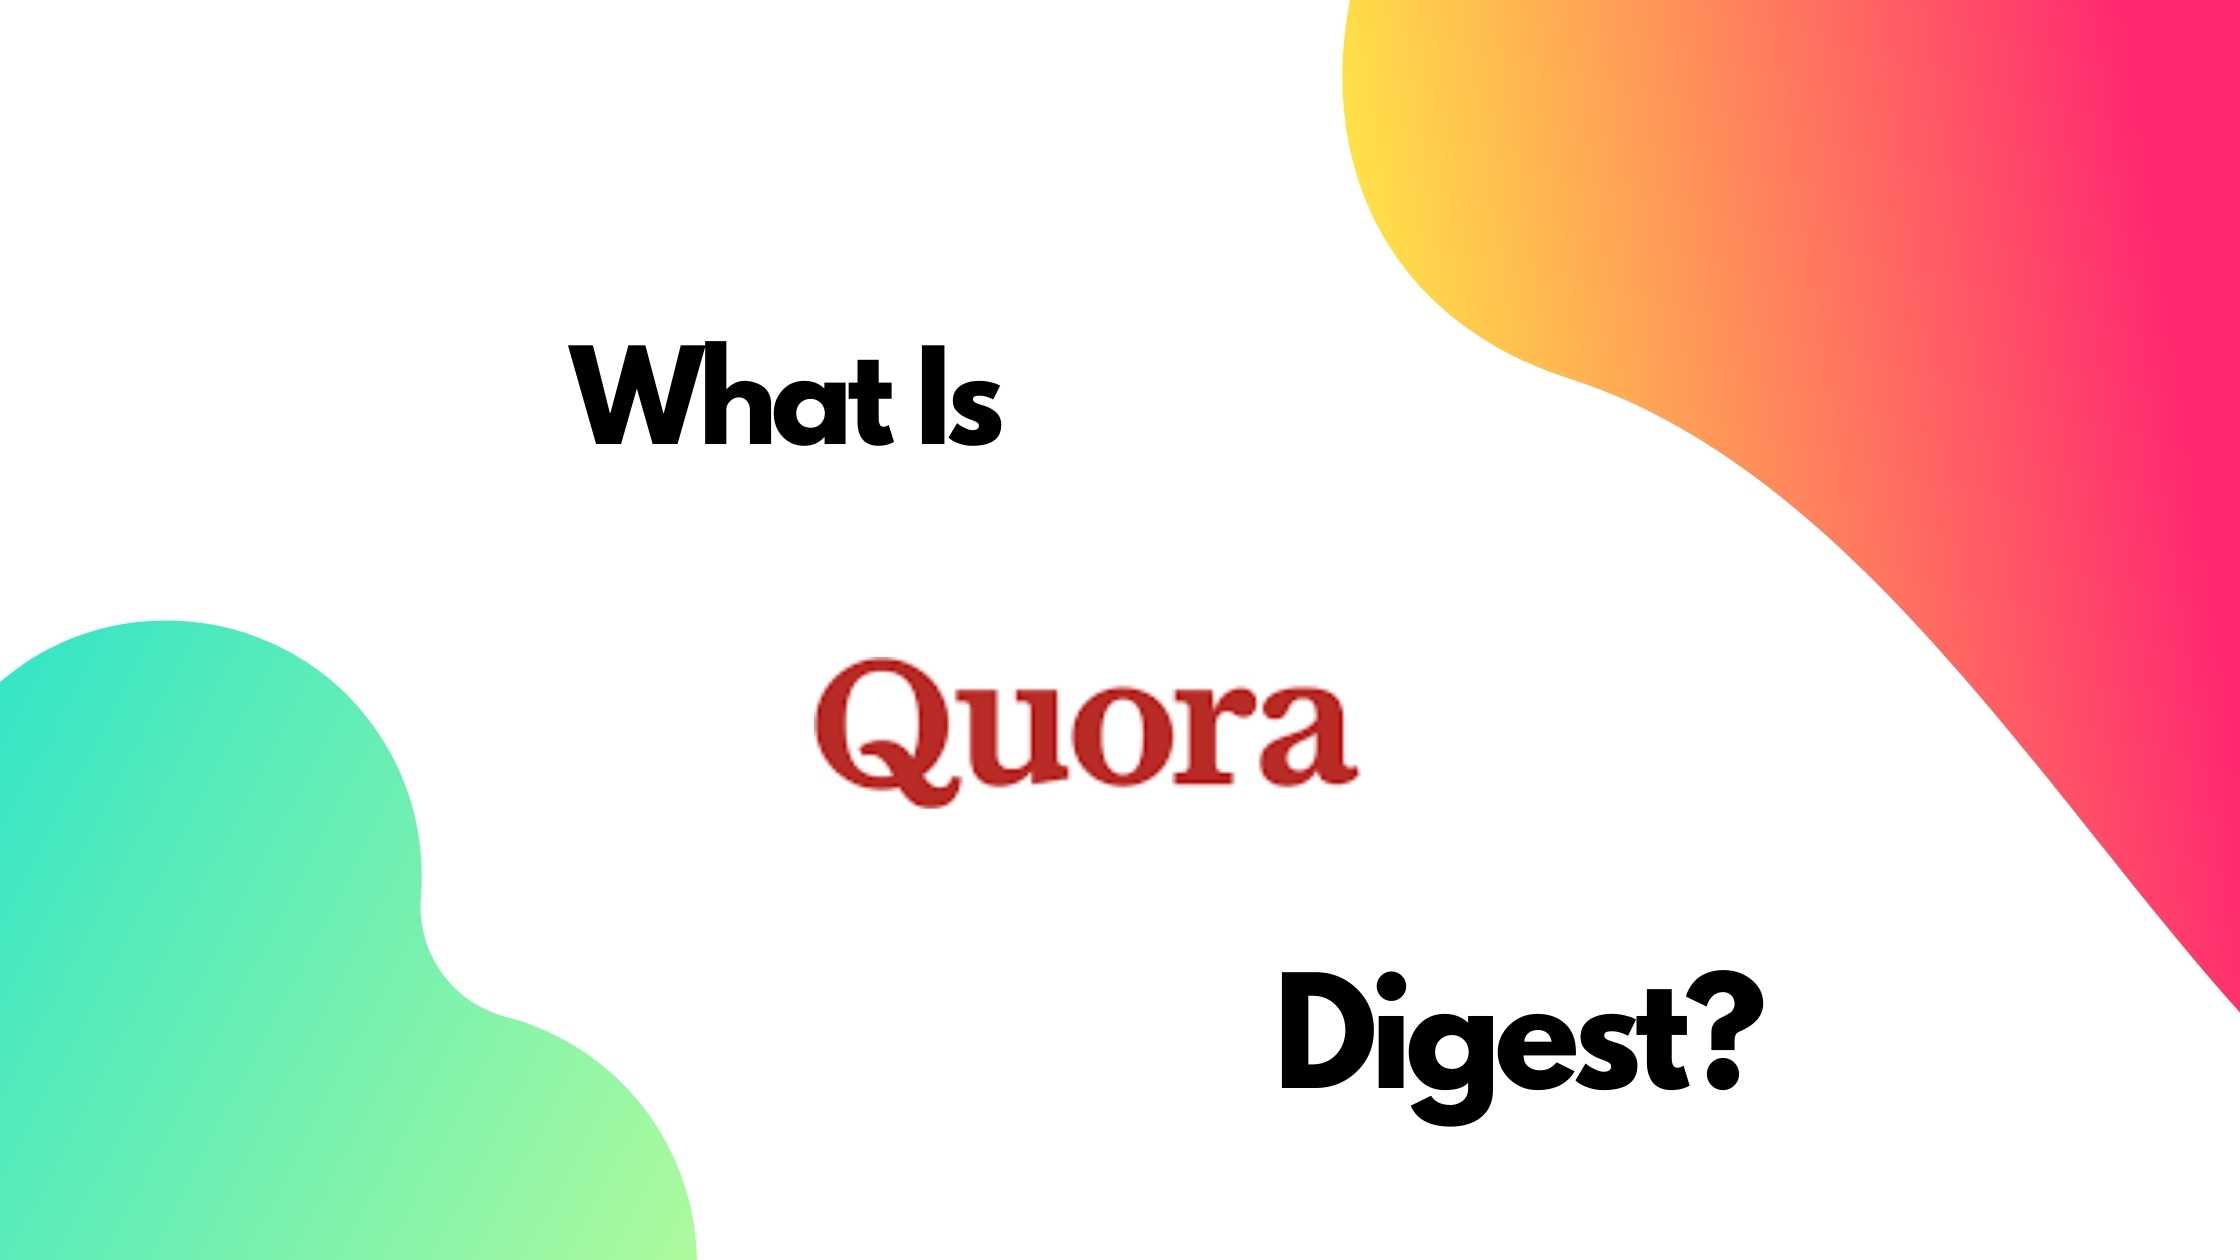 What is Quora Digest